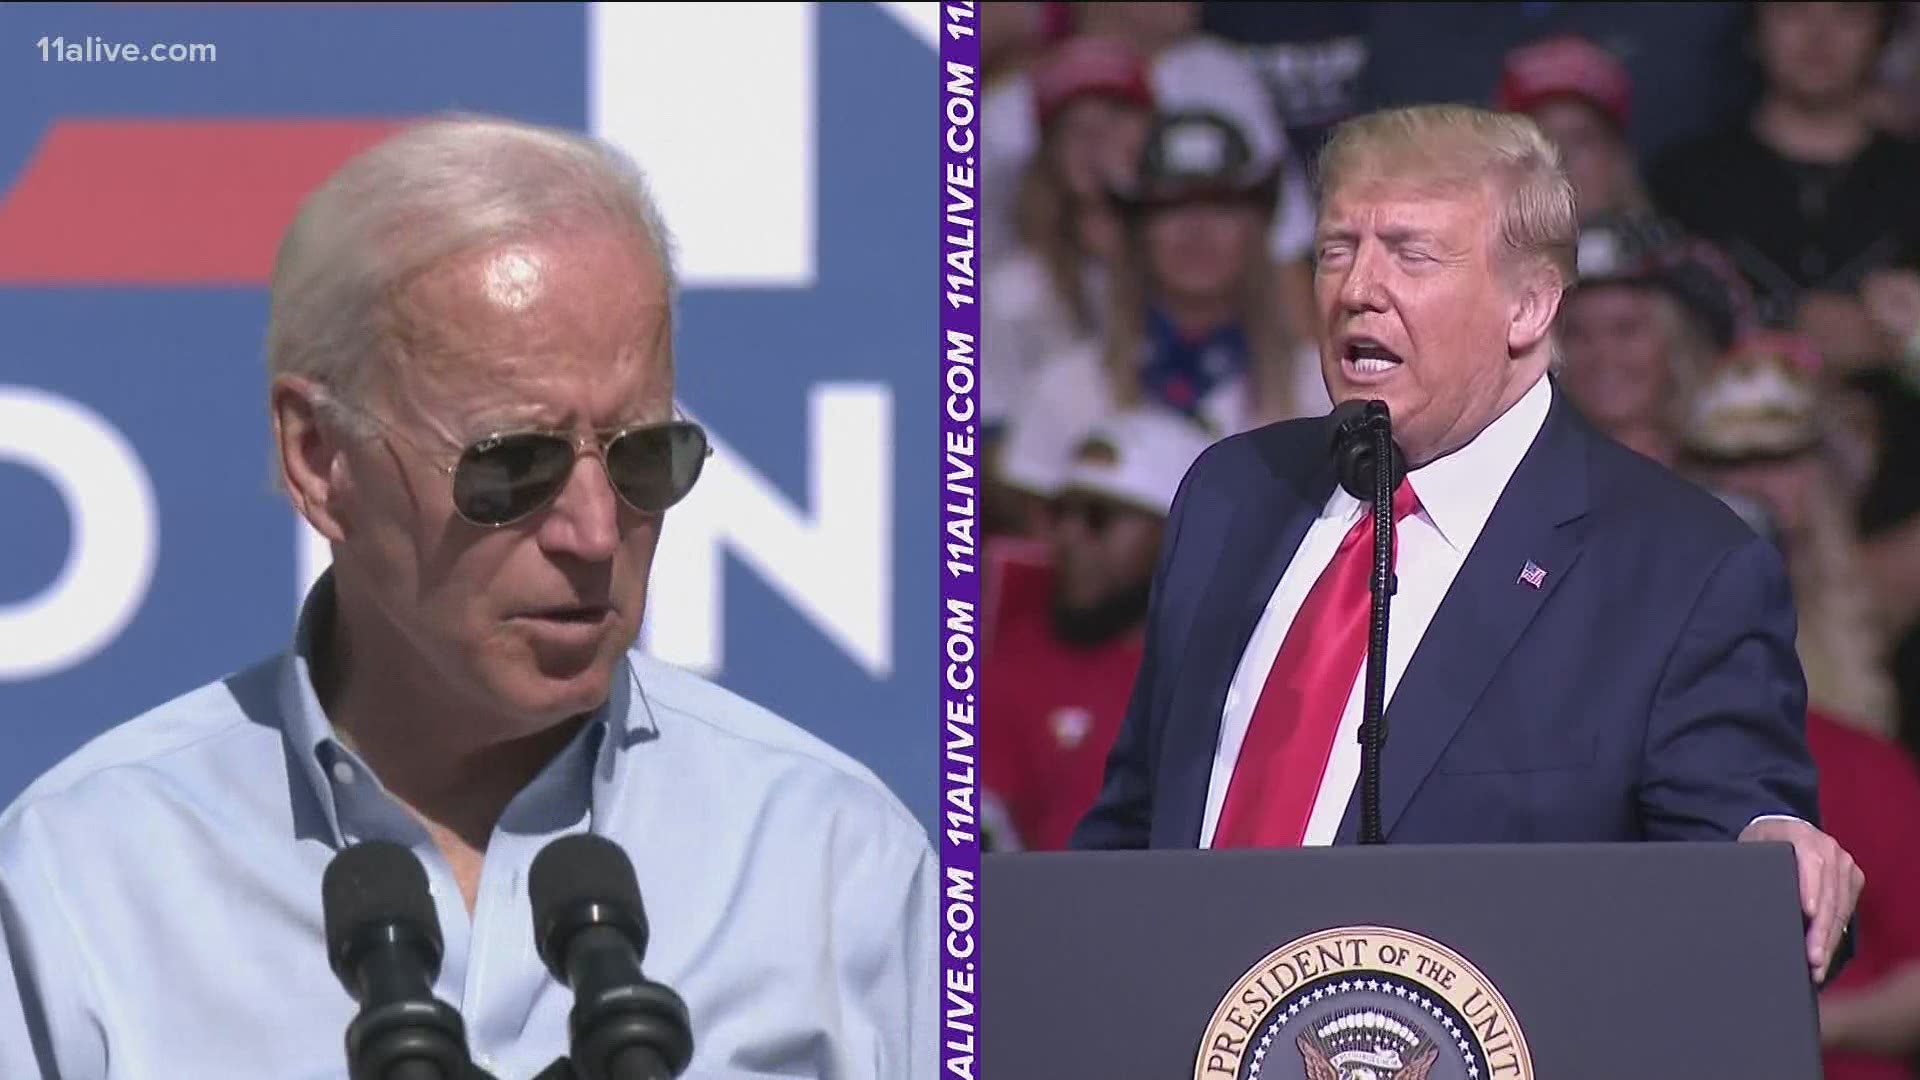 NBC reports Biden holds a double digit lead nationally over Trump.